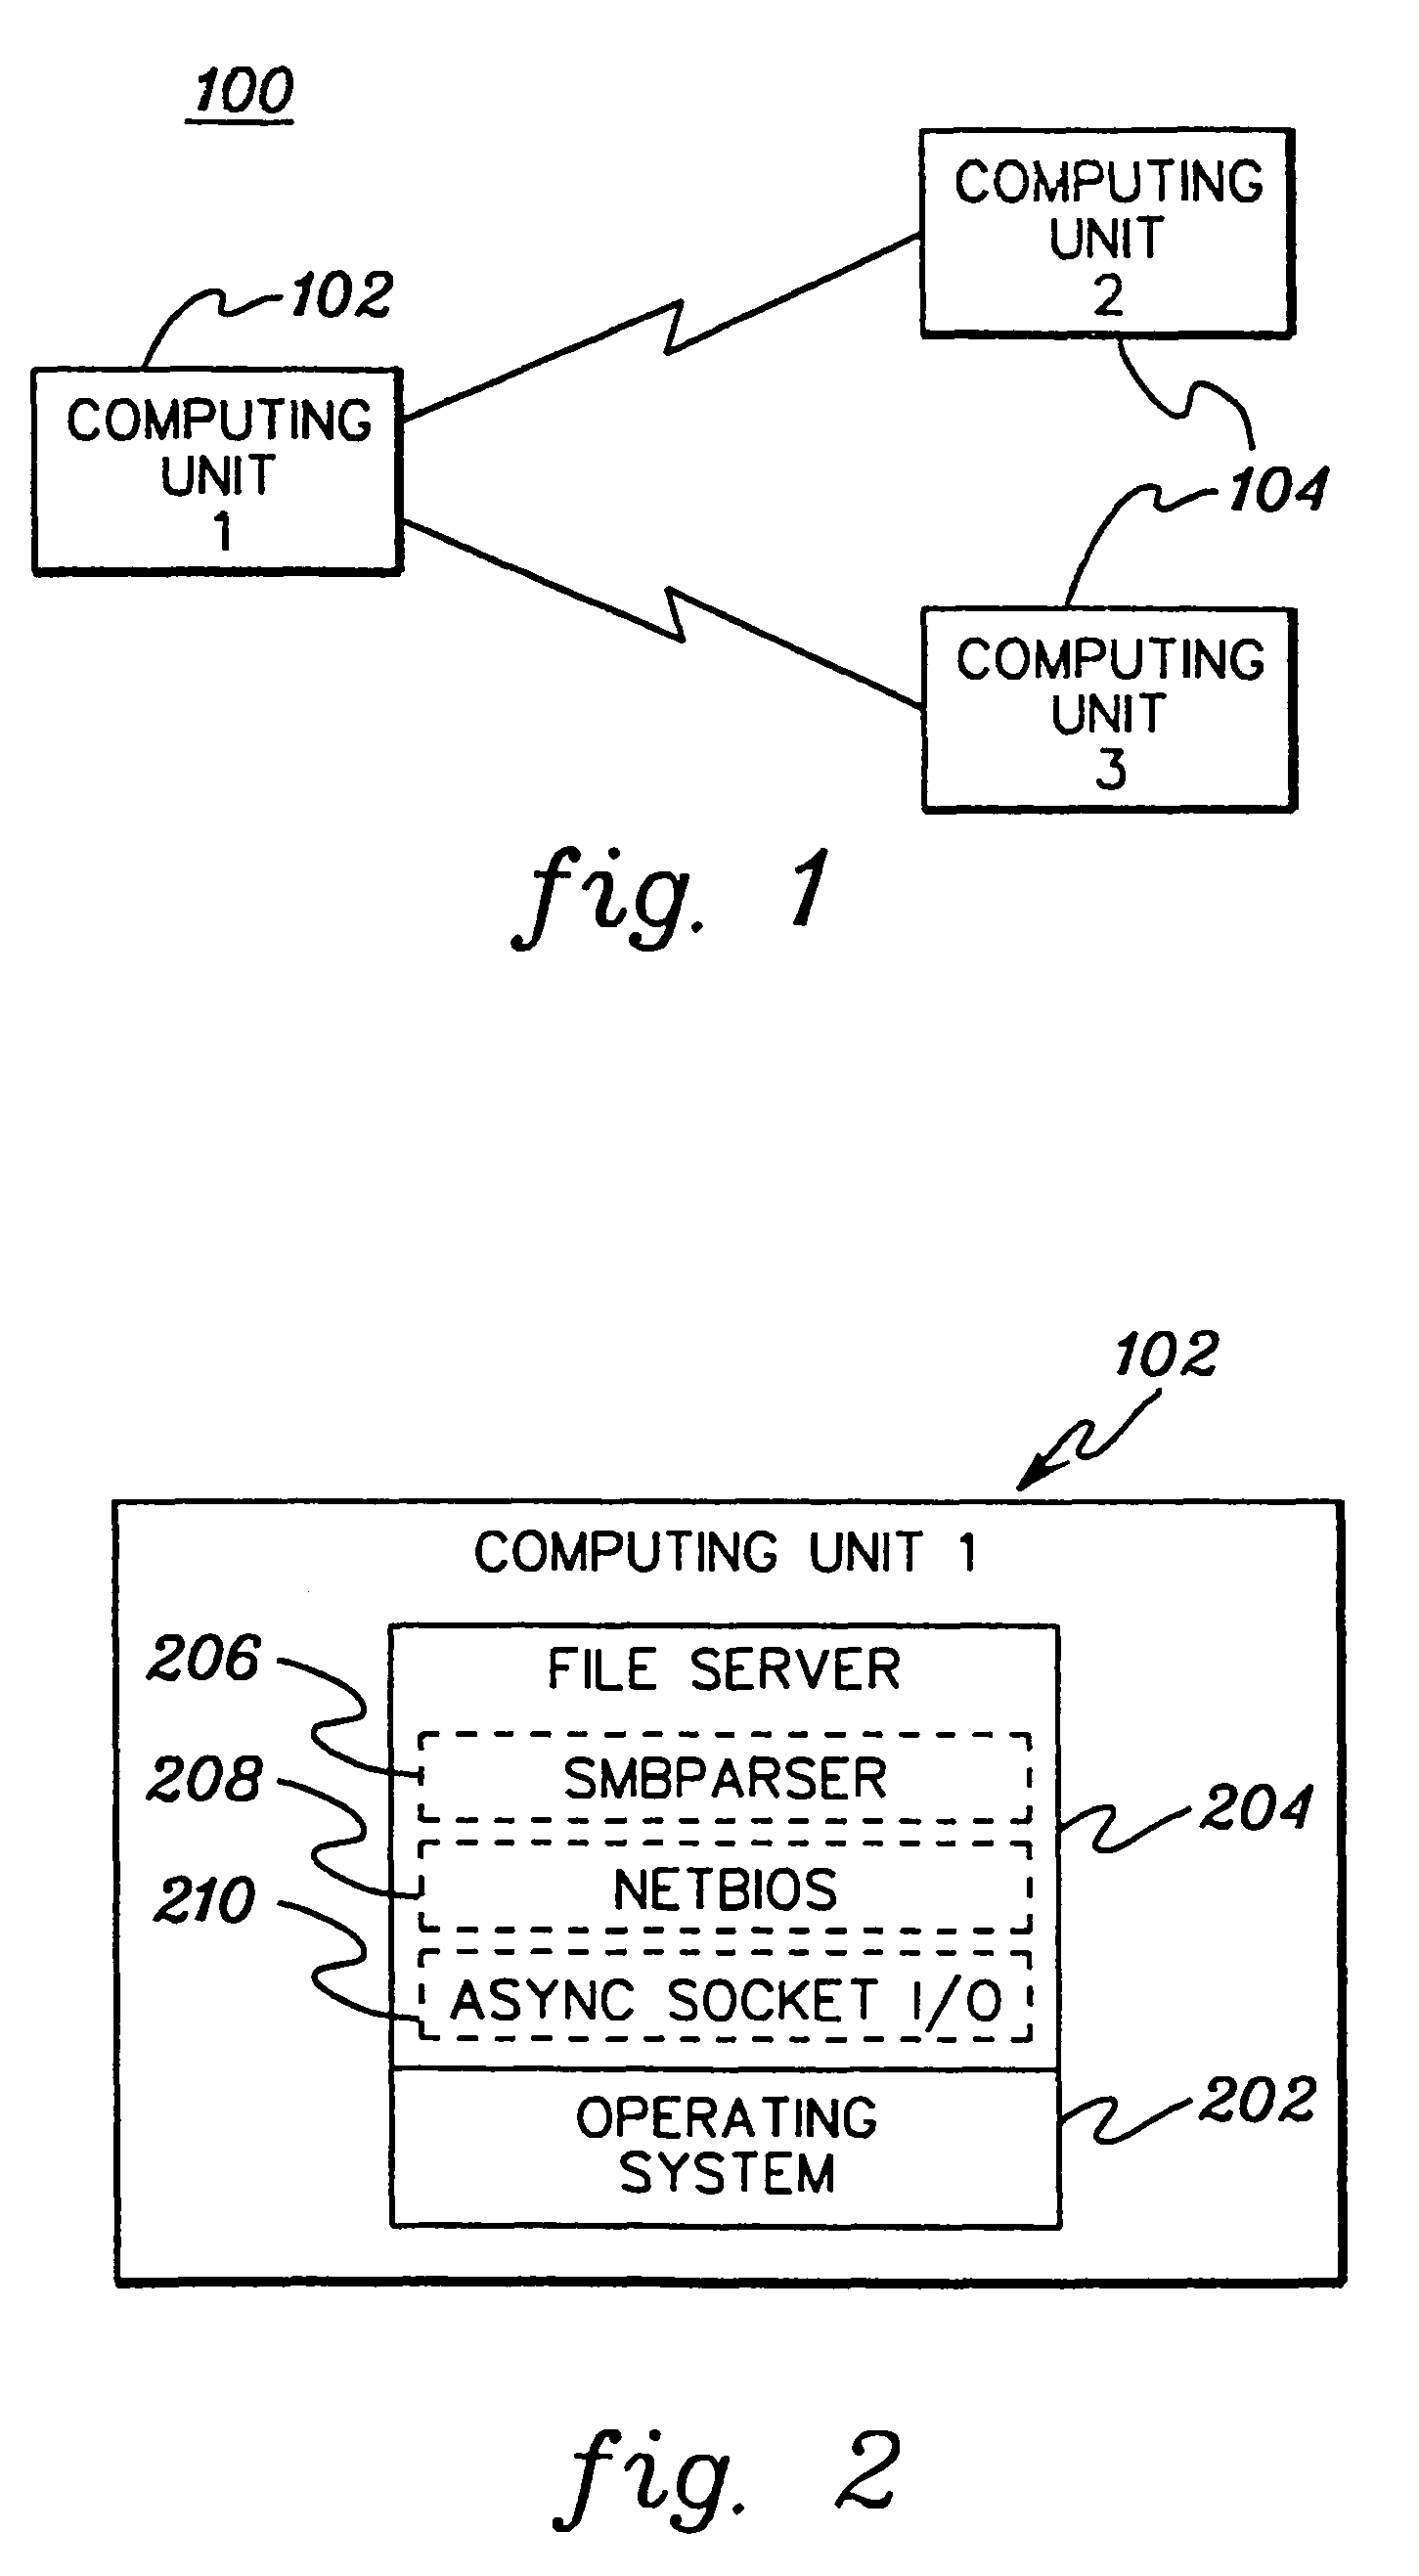 Method, system and program products for managing thread pools of a computing environment to avoid deadlock situations